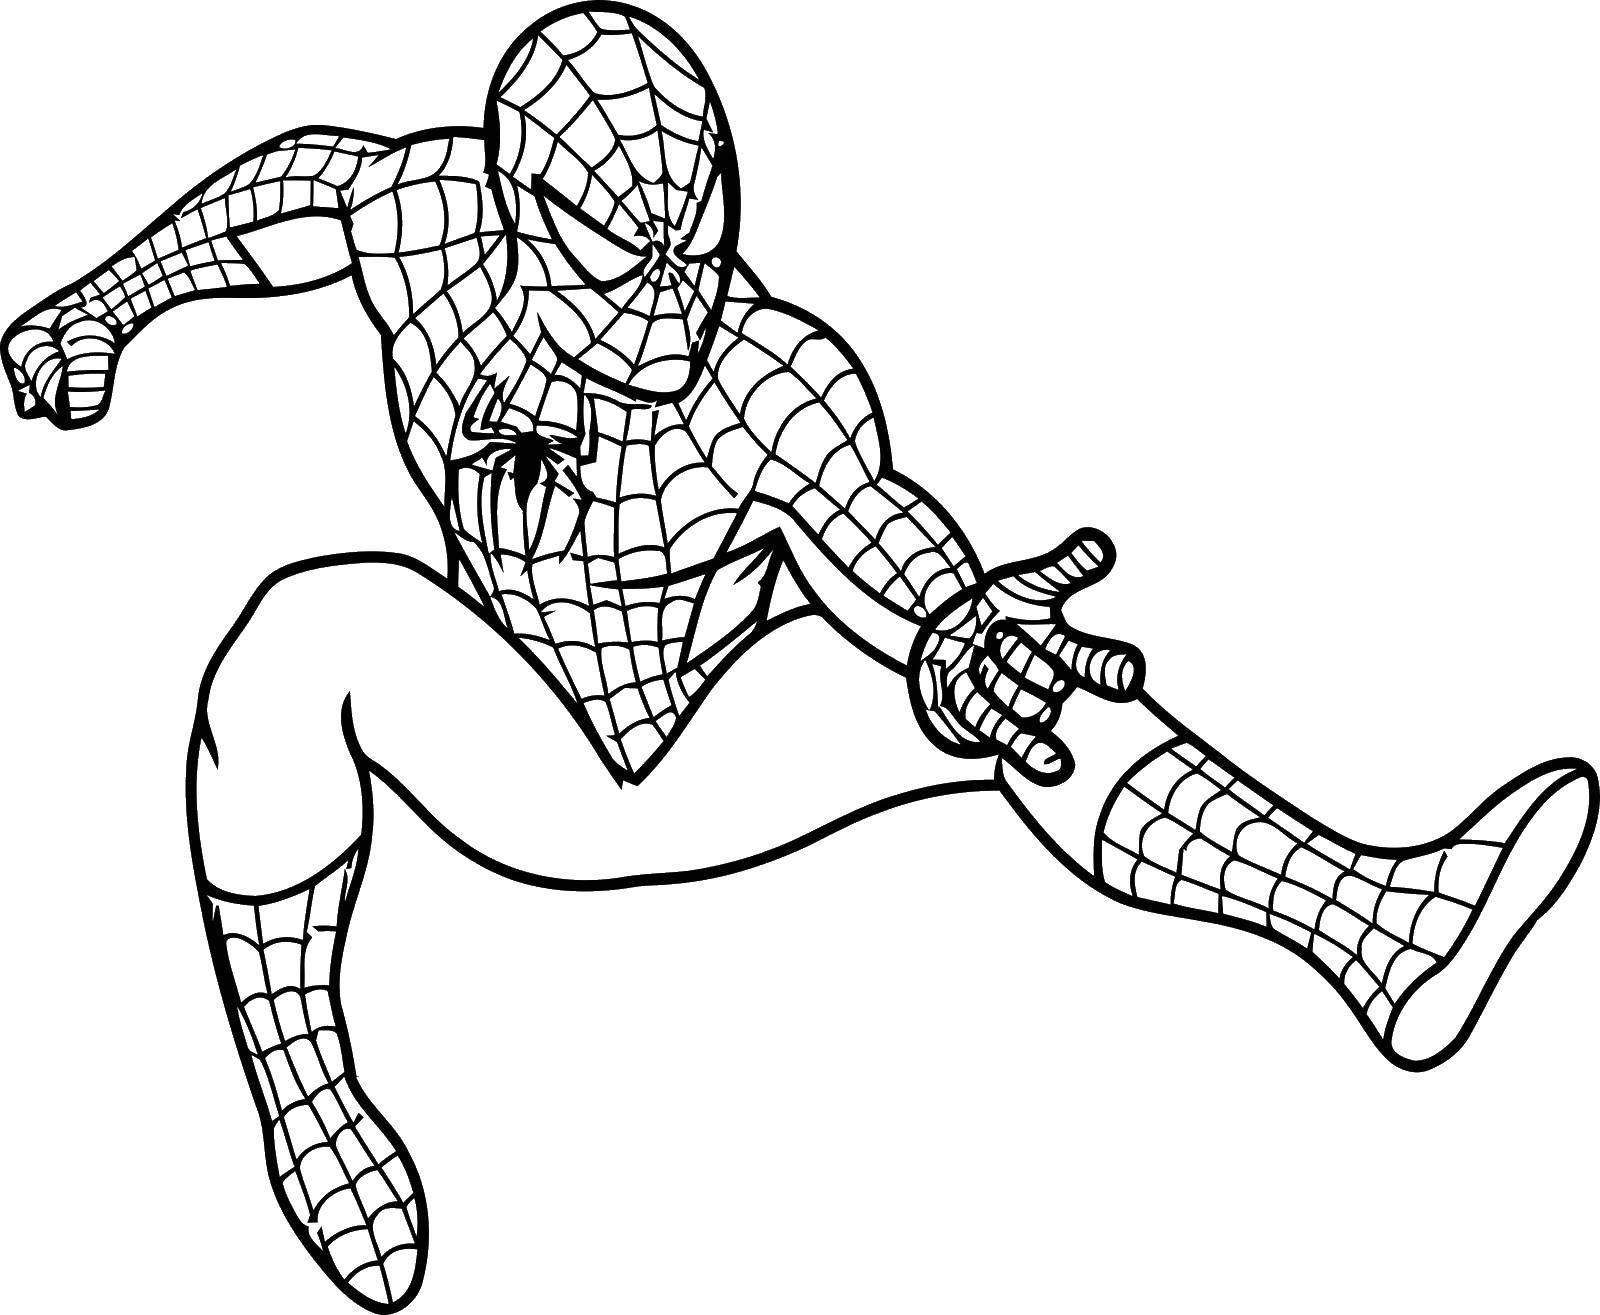 Coloring Spider-man from the comics. Category Comics. Tags:  comics, Spiderman, Spiderman.